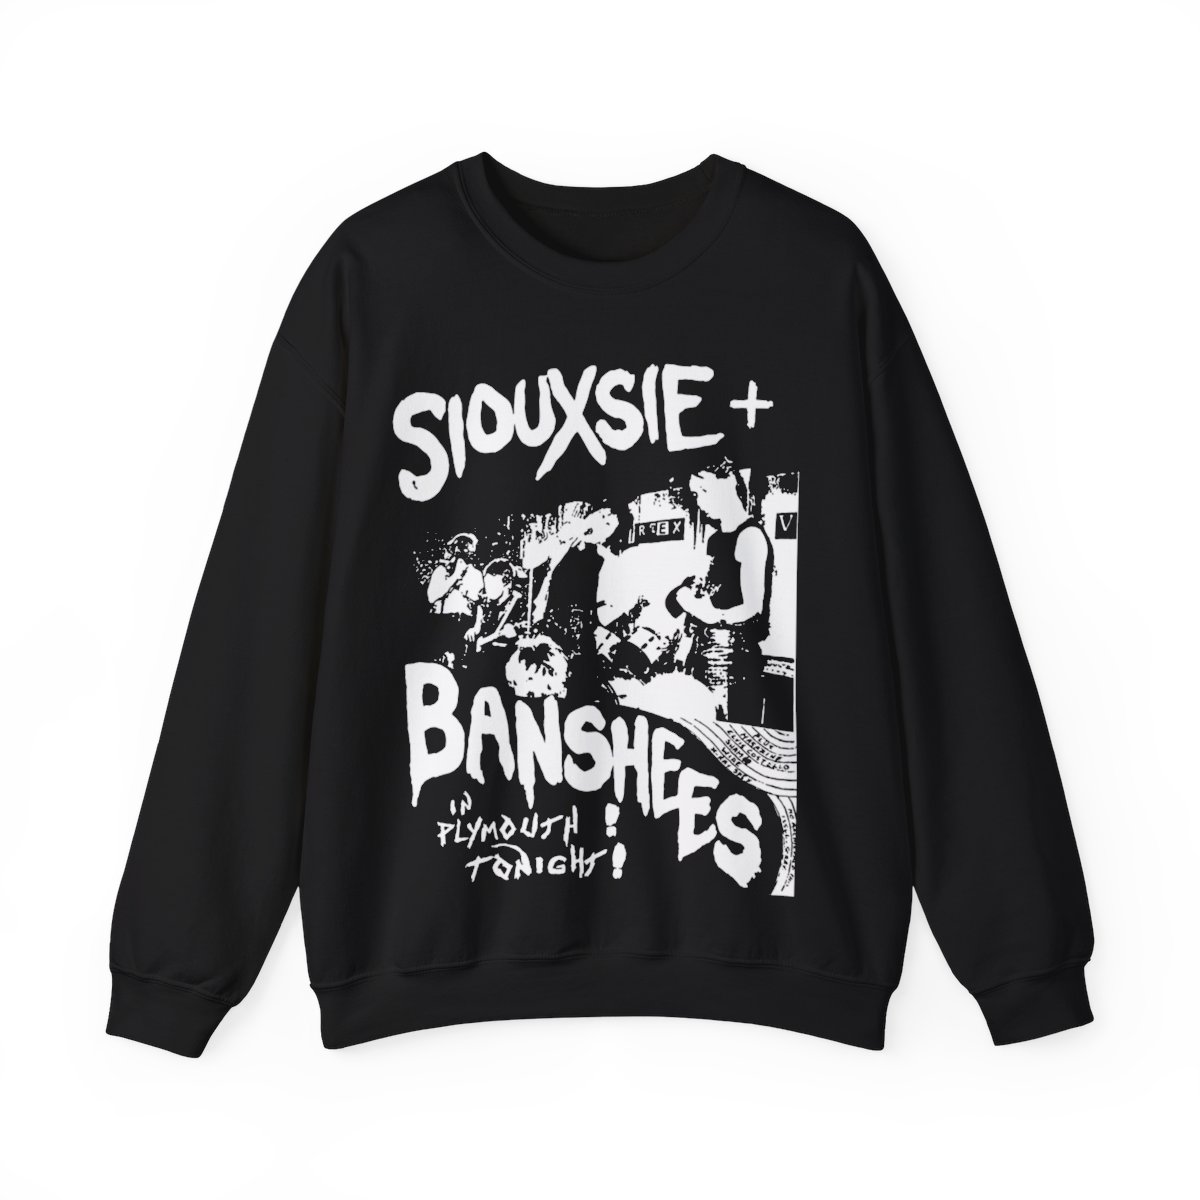 Siouxsie and the Banshees the cure mission goth 80s unisex Shirt Unisex Heavy Blend Crewneck Sweatshirt